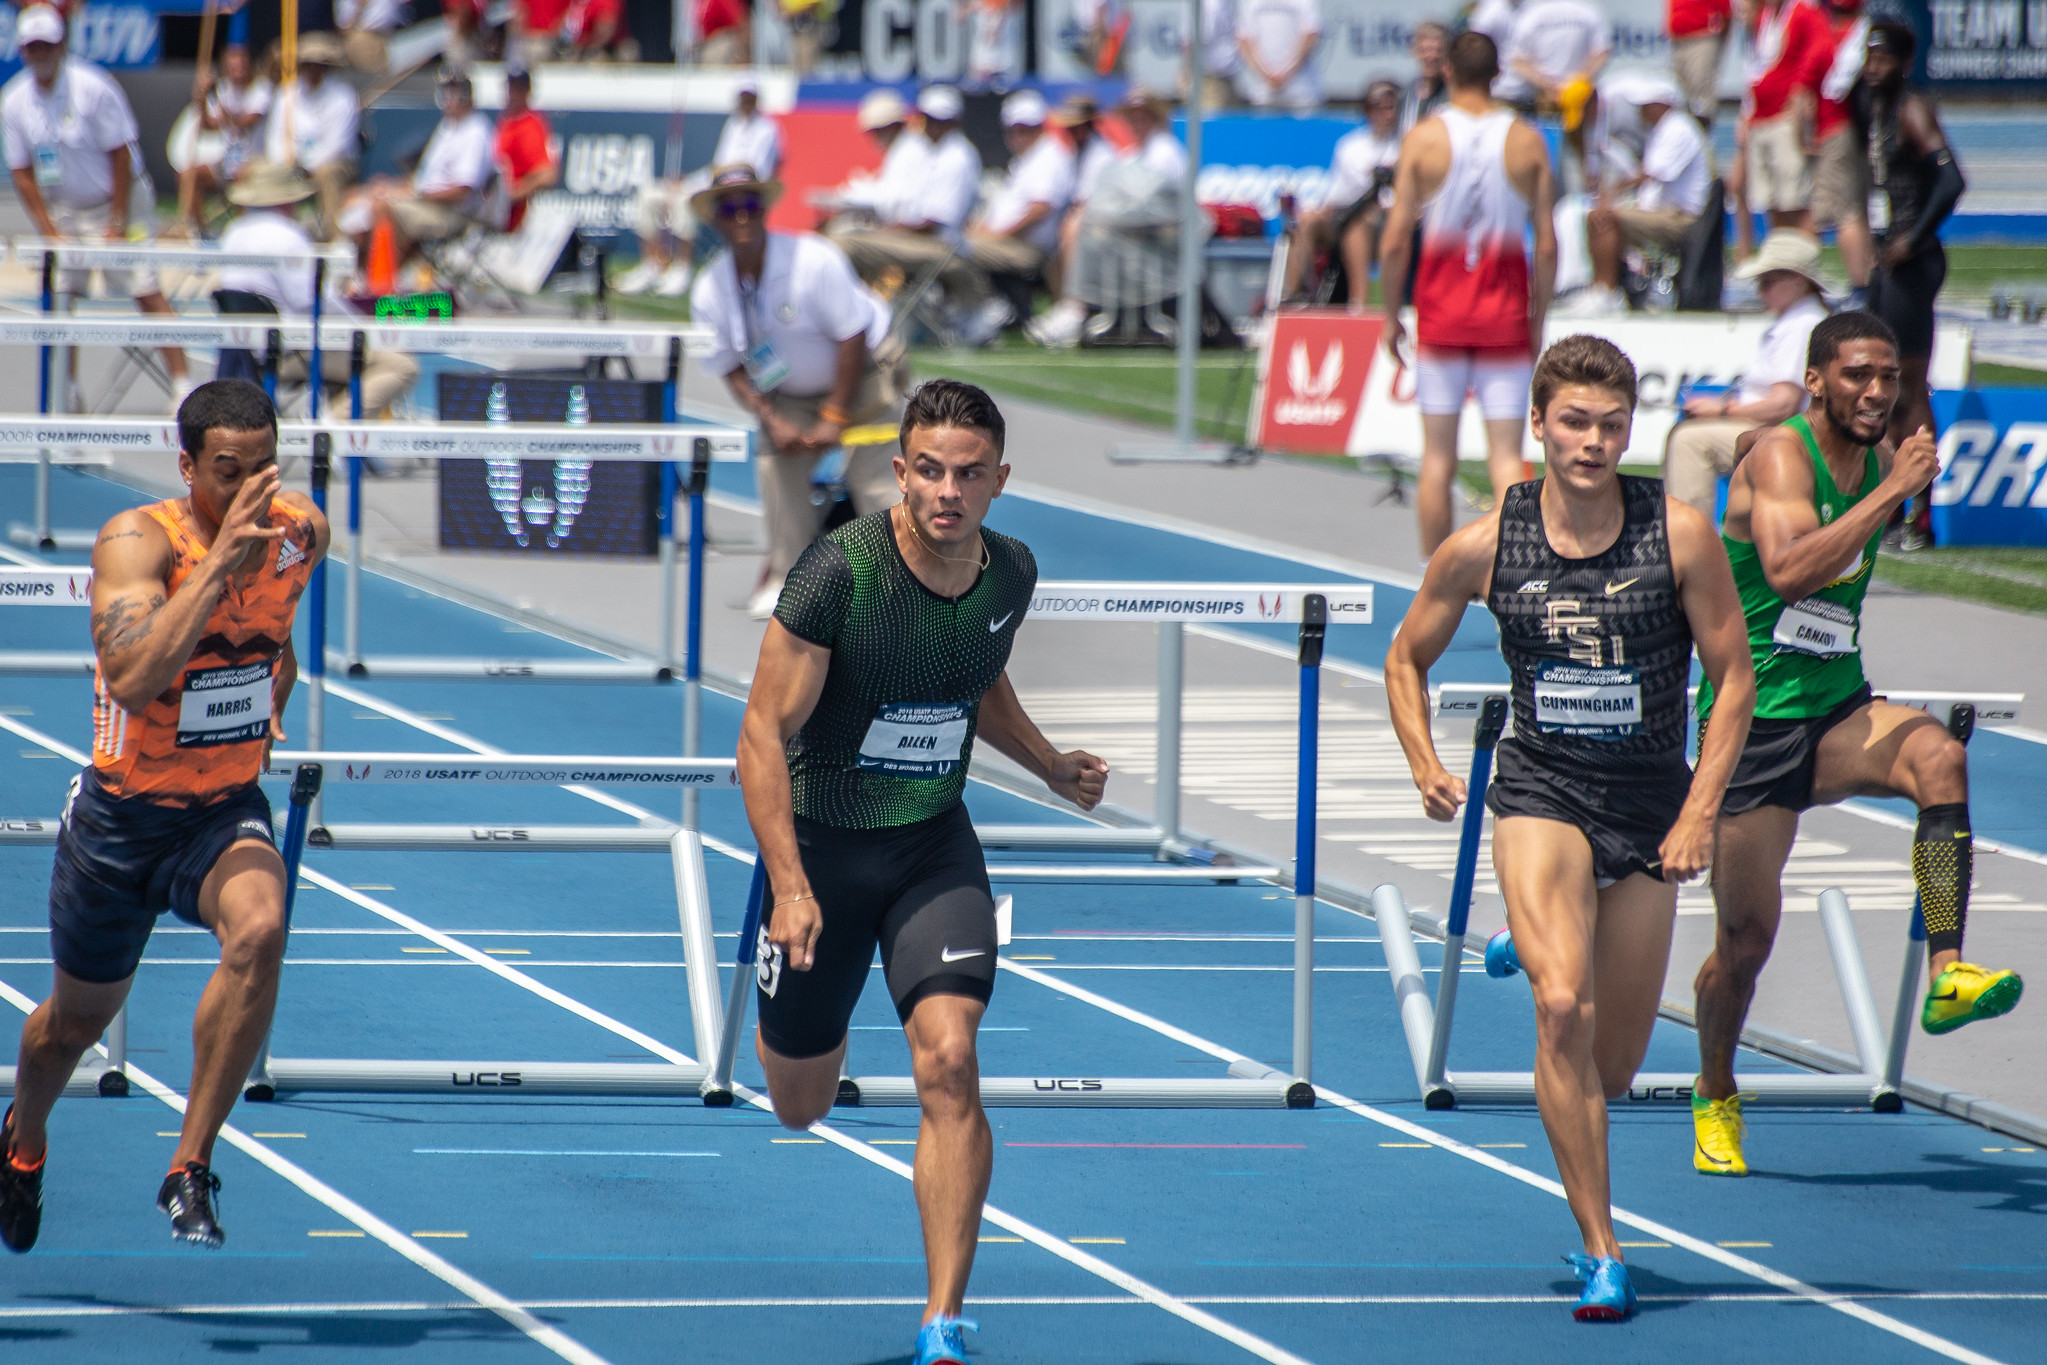 Devon Allen's reaction times: Track & field's rules and tech need to keep up